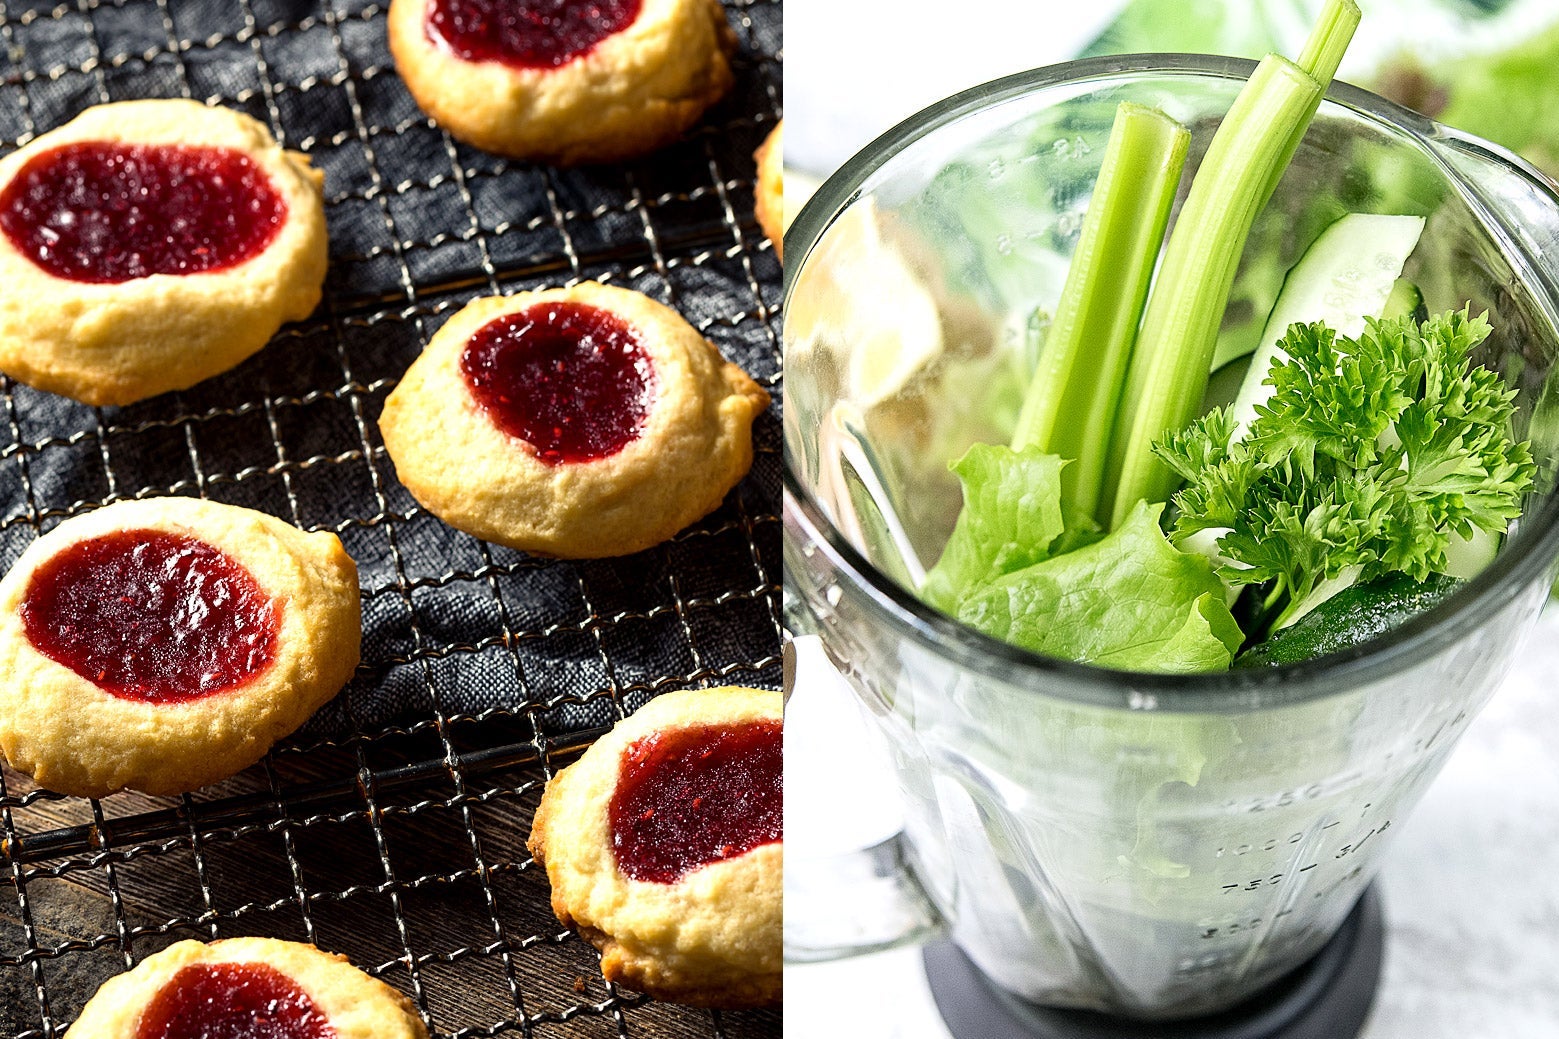 One side is thumbprint cookies, the other side is greens going into a blender.